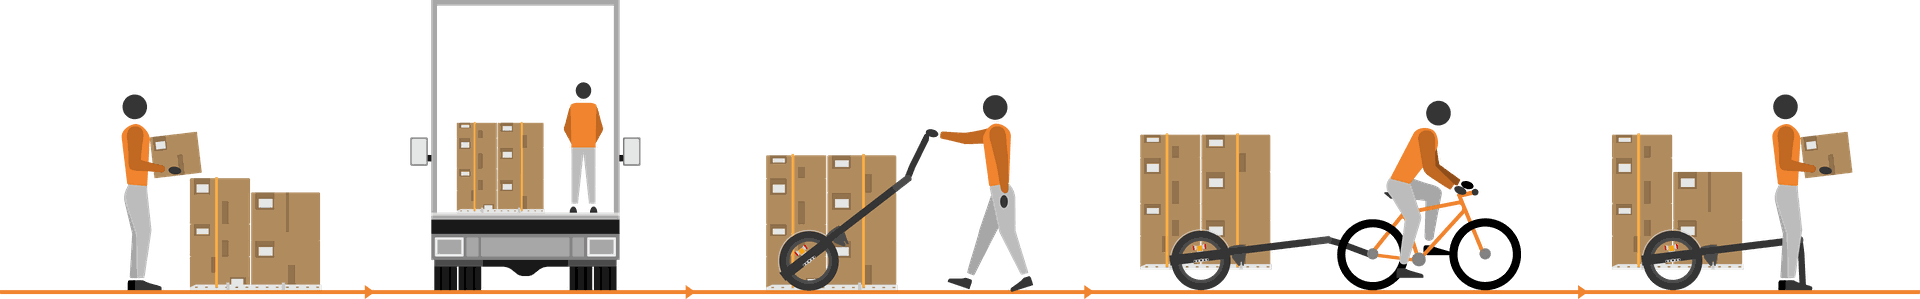 Illustration showing how to use the BicyLift flatbed in the Supply chain, load goods, transport for long distances, unload the flatbed, carry by bike